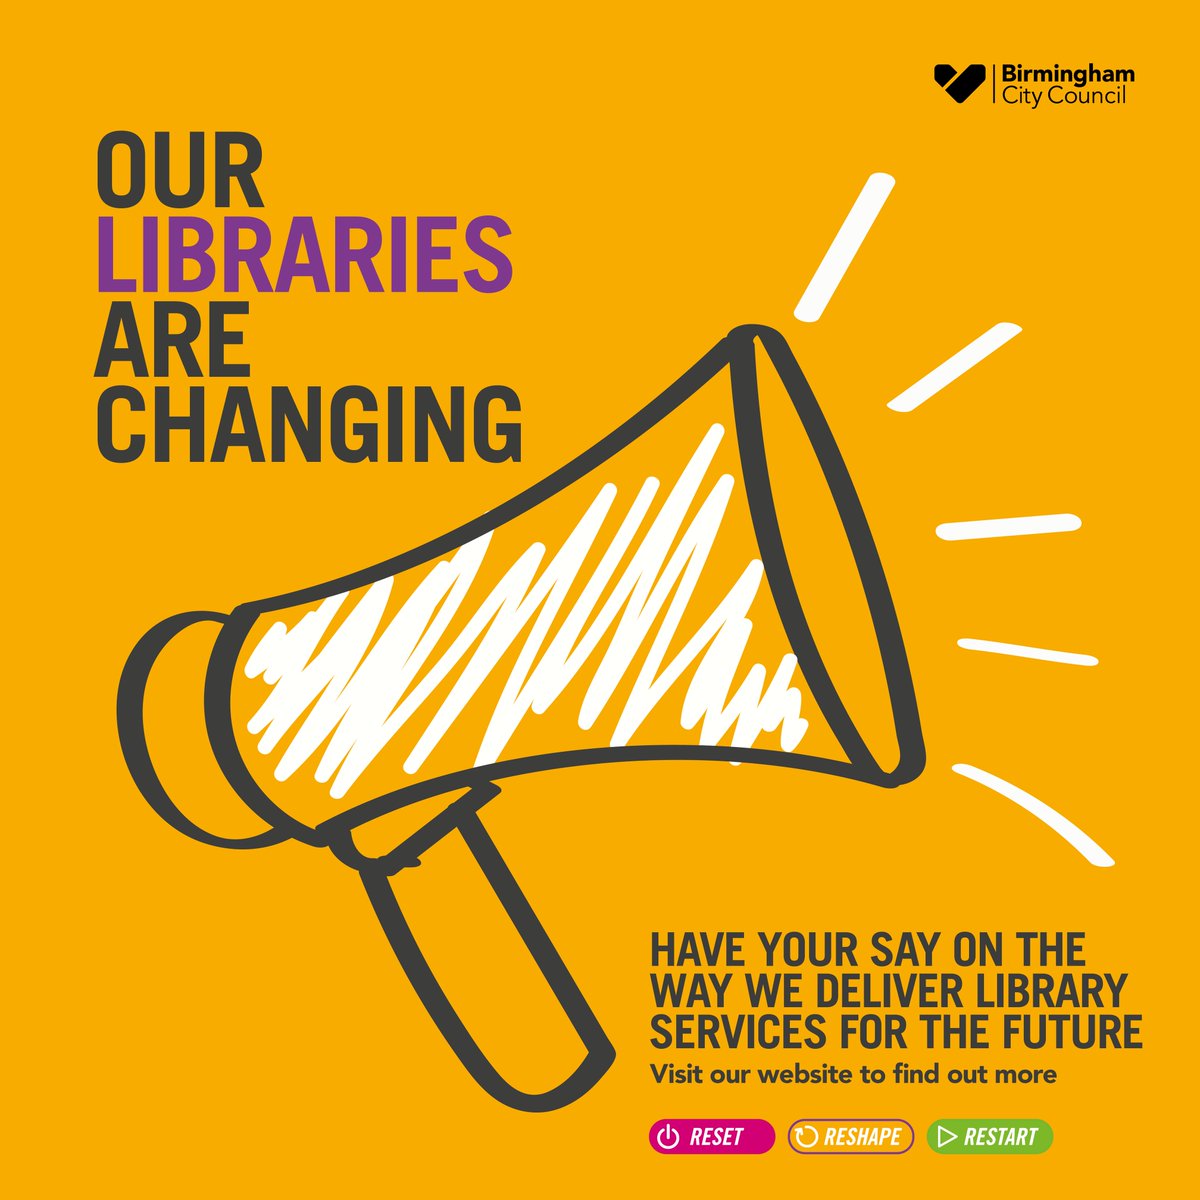 🗣️ We are currently consulting on future options to delivery library services and meet budget savings. Take part in the survey and join one of our online consultations. For further info visit the link in comments.